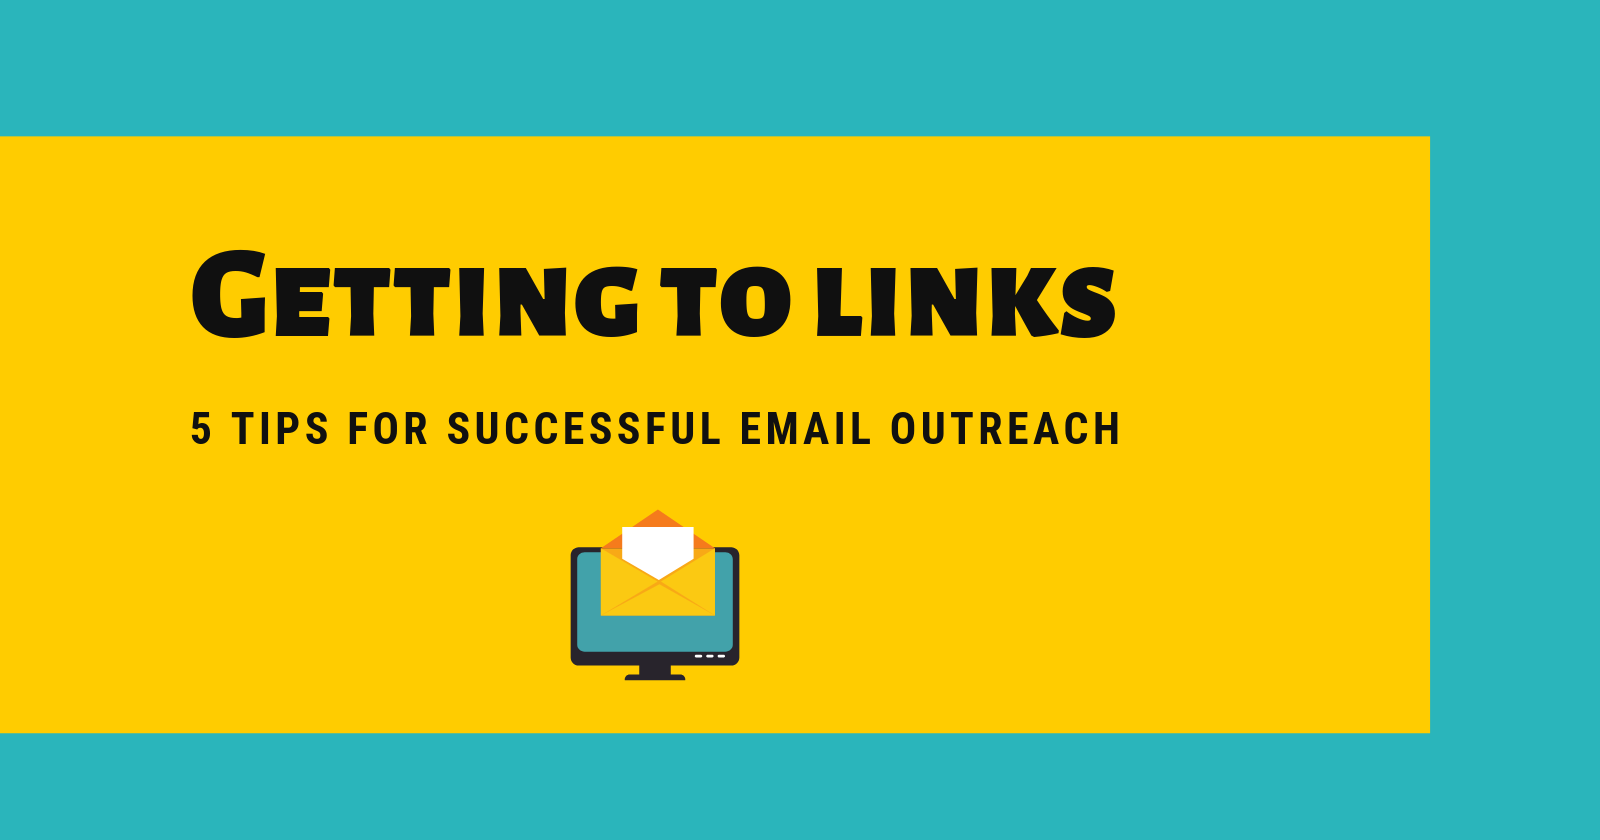 5 tips for successful email outreach